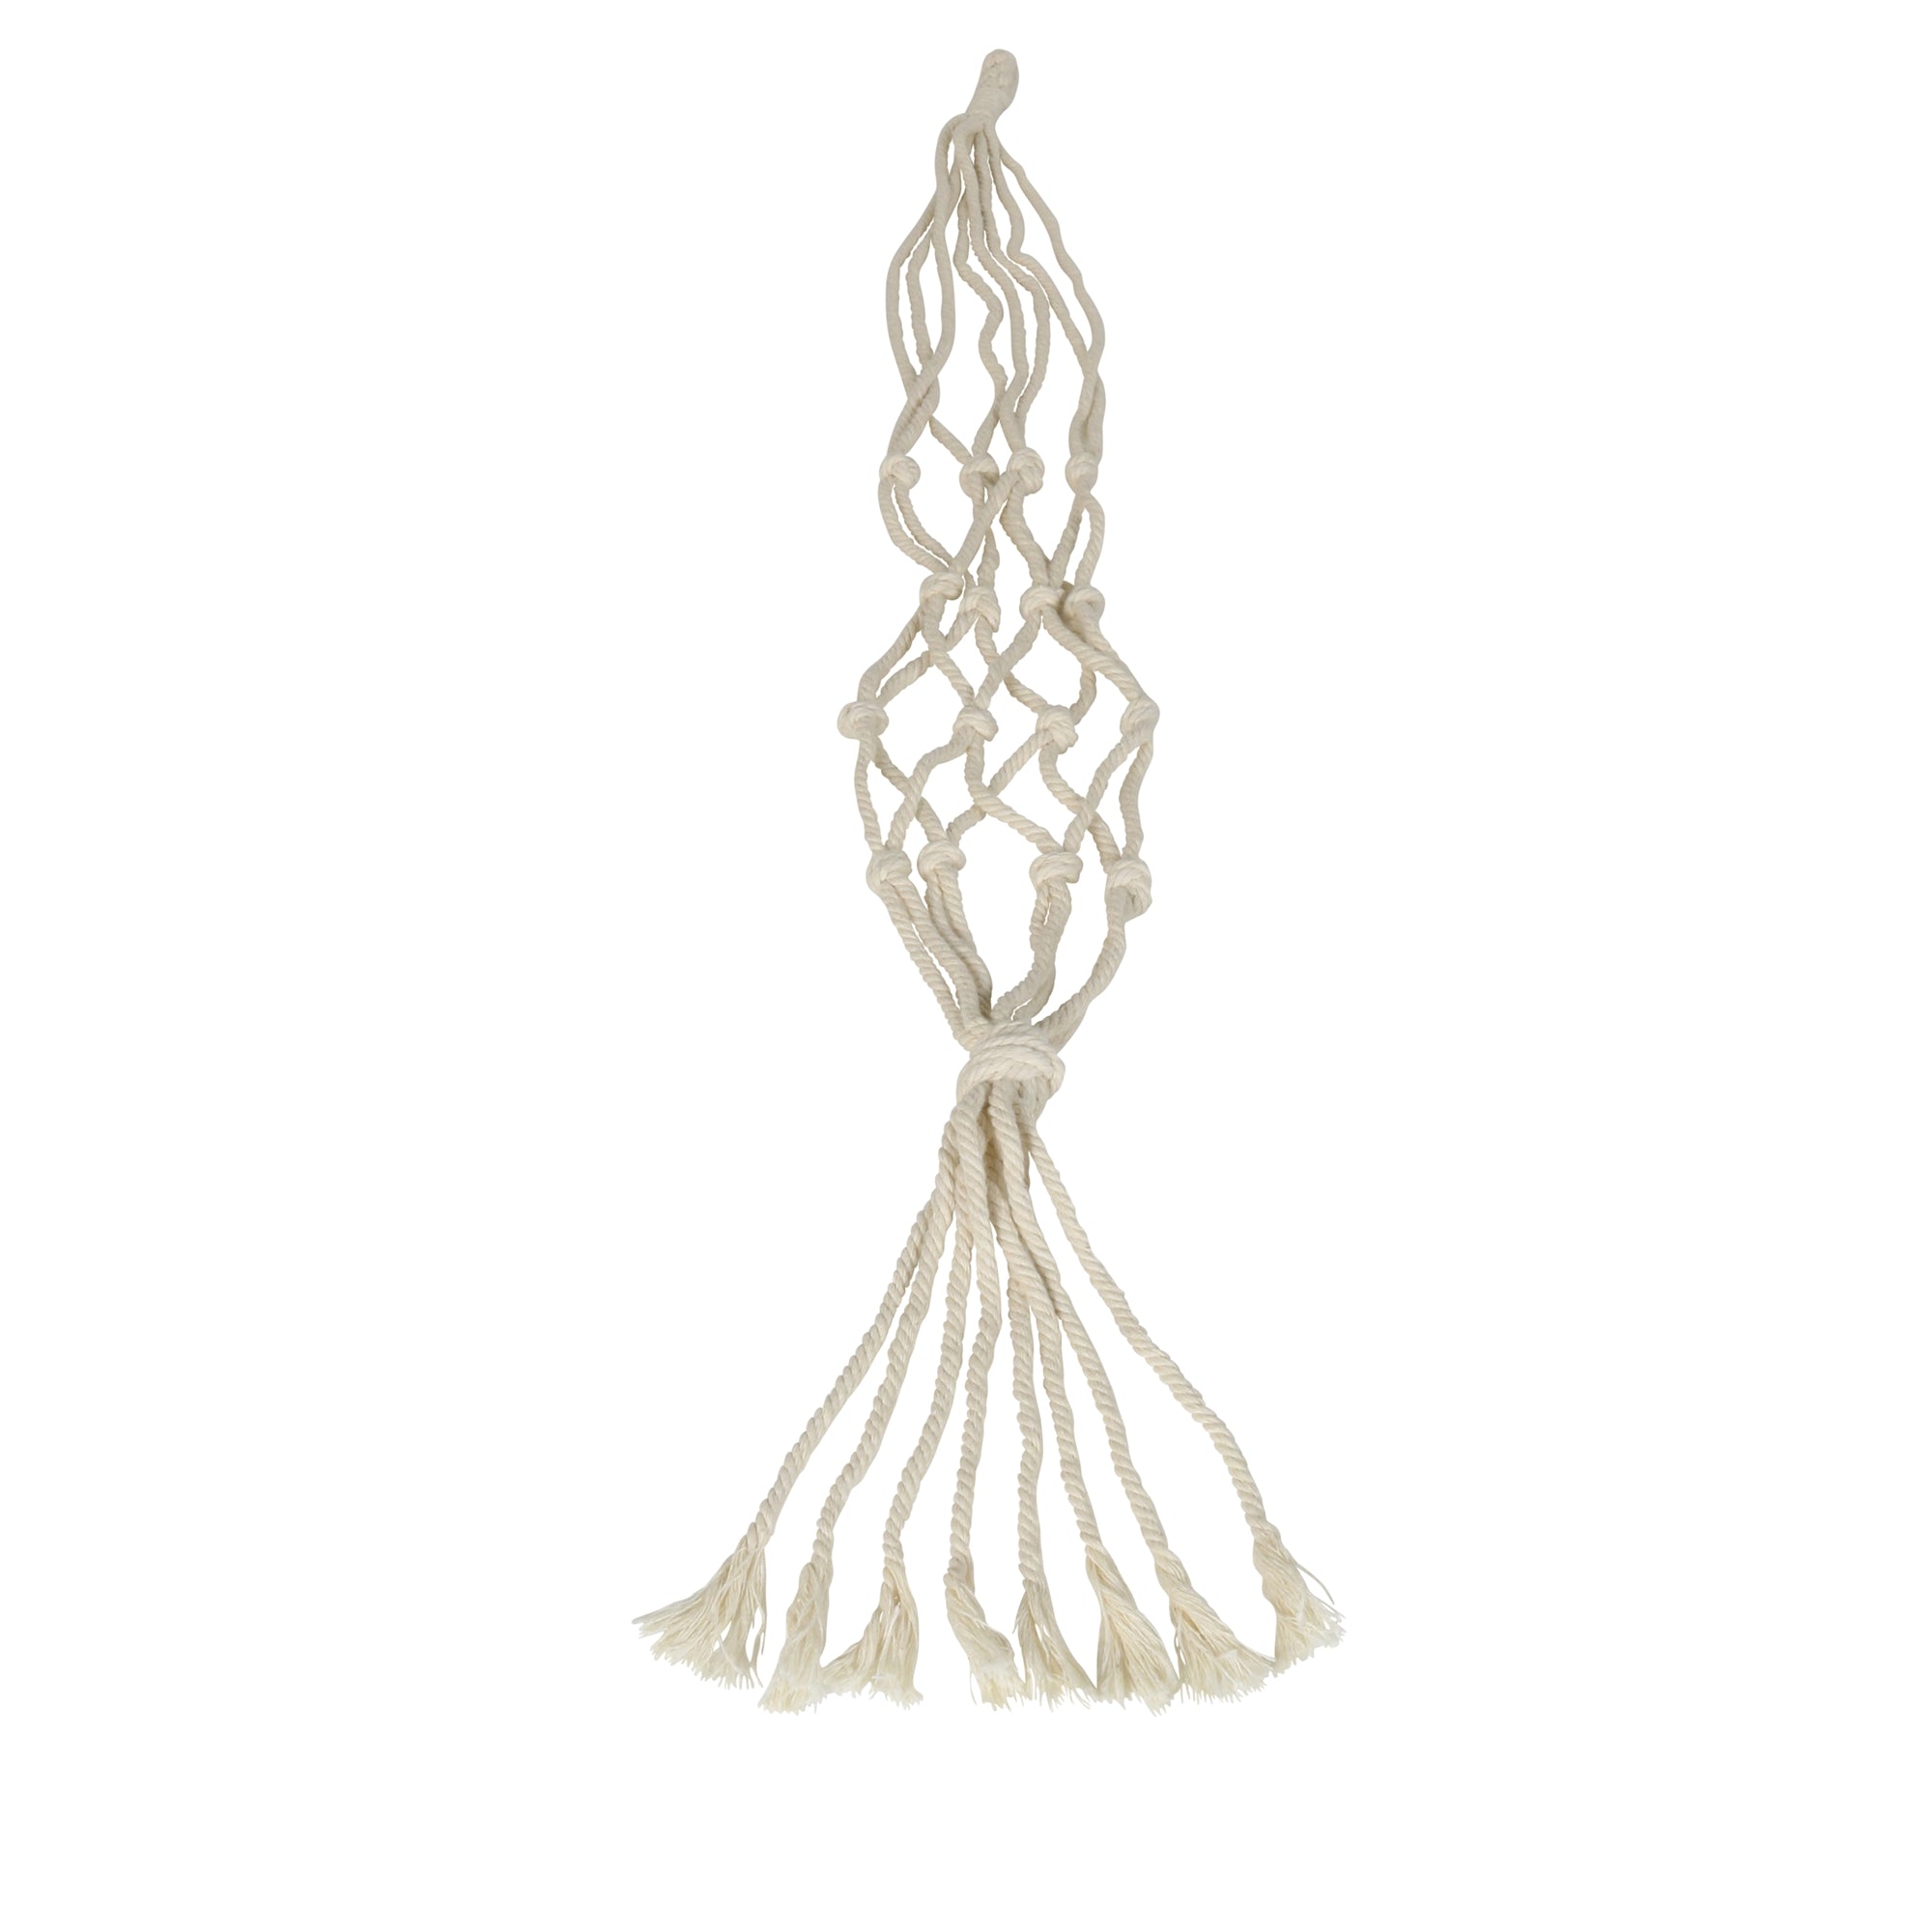 Macrame Hanger-Home Decor-Vixen Collection, Day Spa and Women's Boutique Located in Seattle, Washington